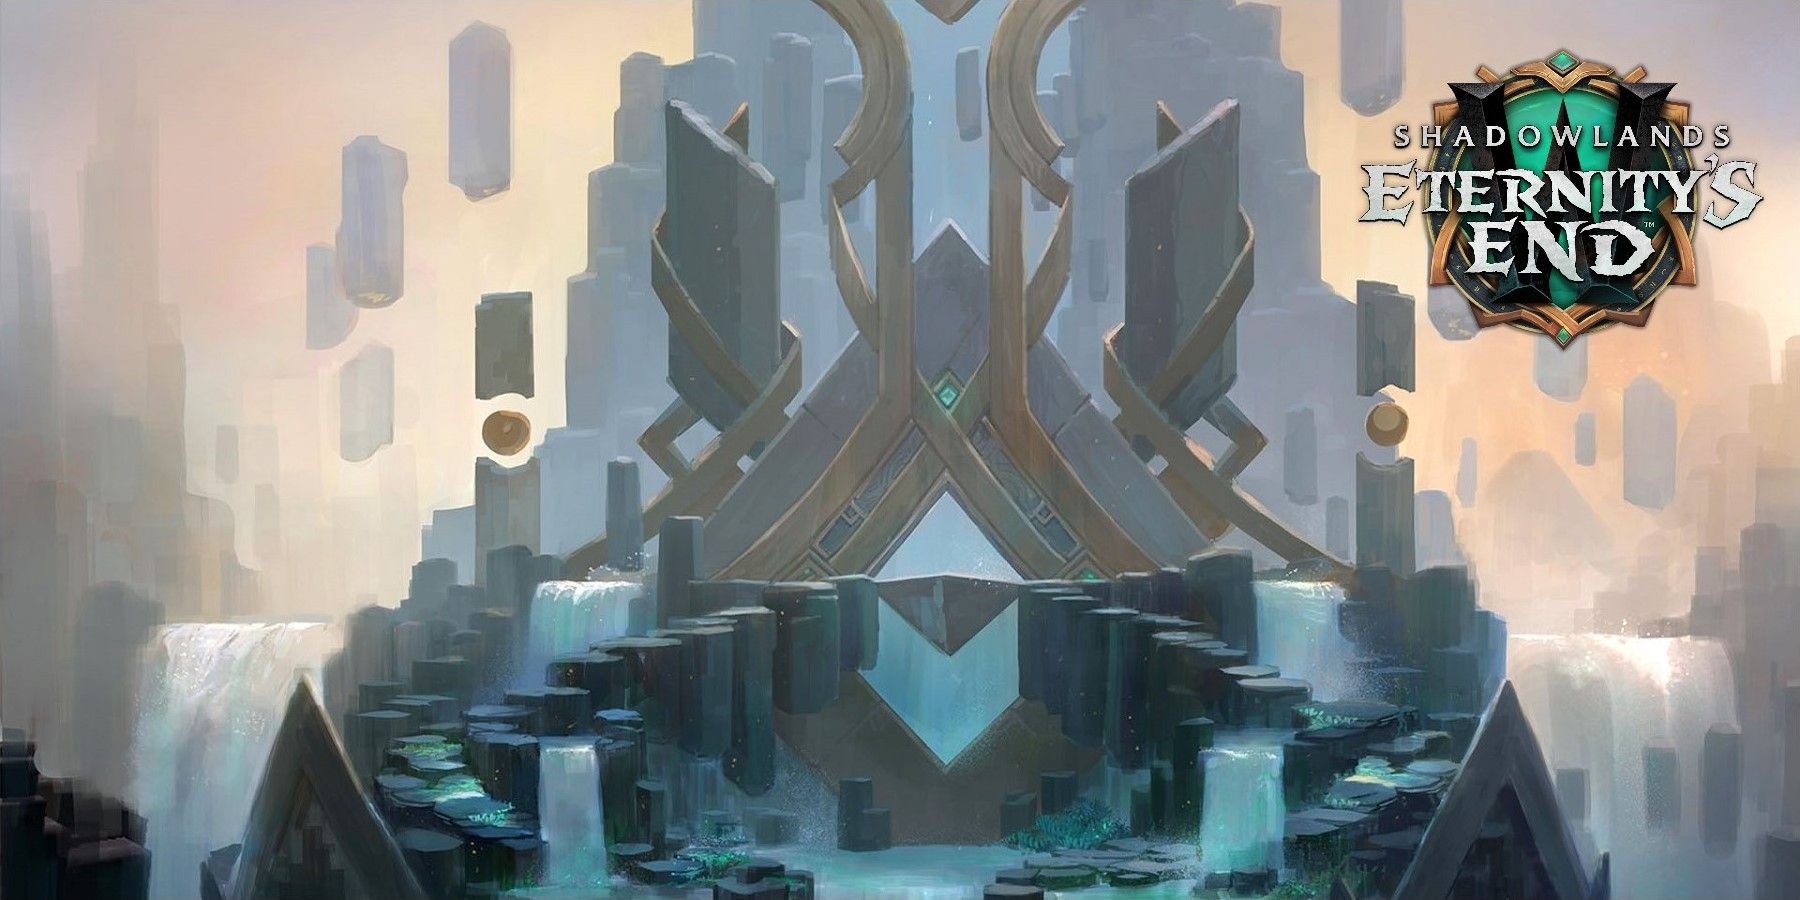 wow-eternity's-end-logo-gate-zerith-mortis-shadowlands-waterfall